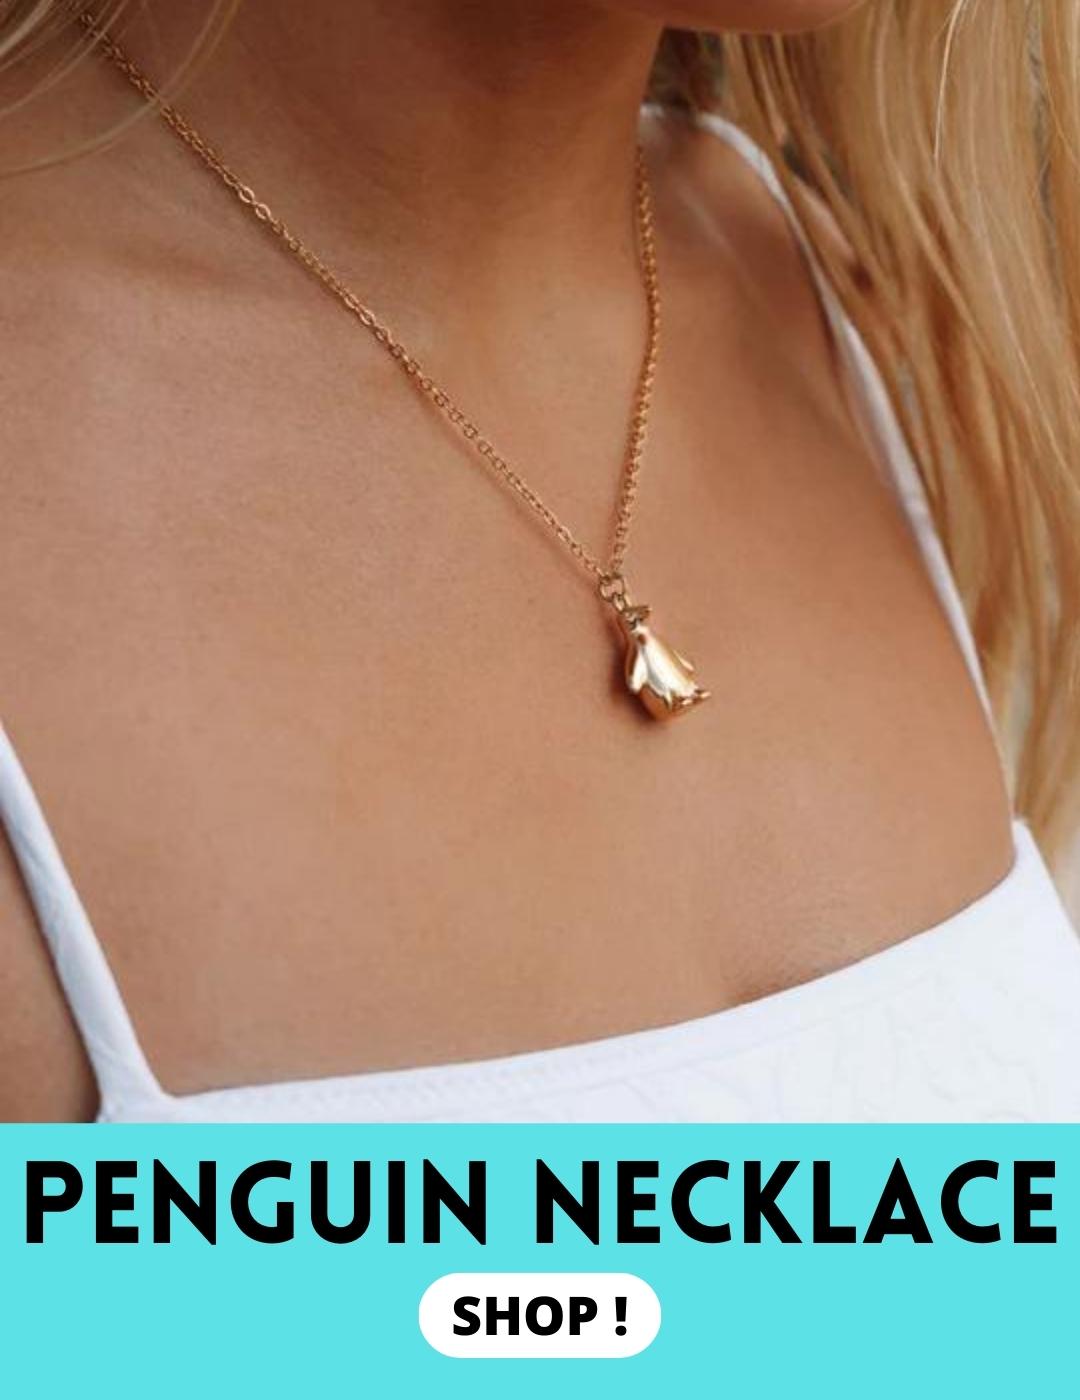 Penguin necklace beautiful meaning